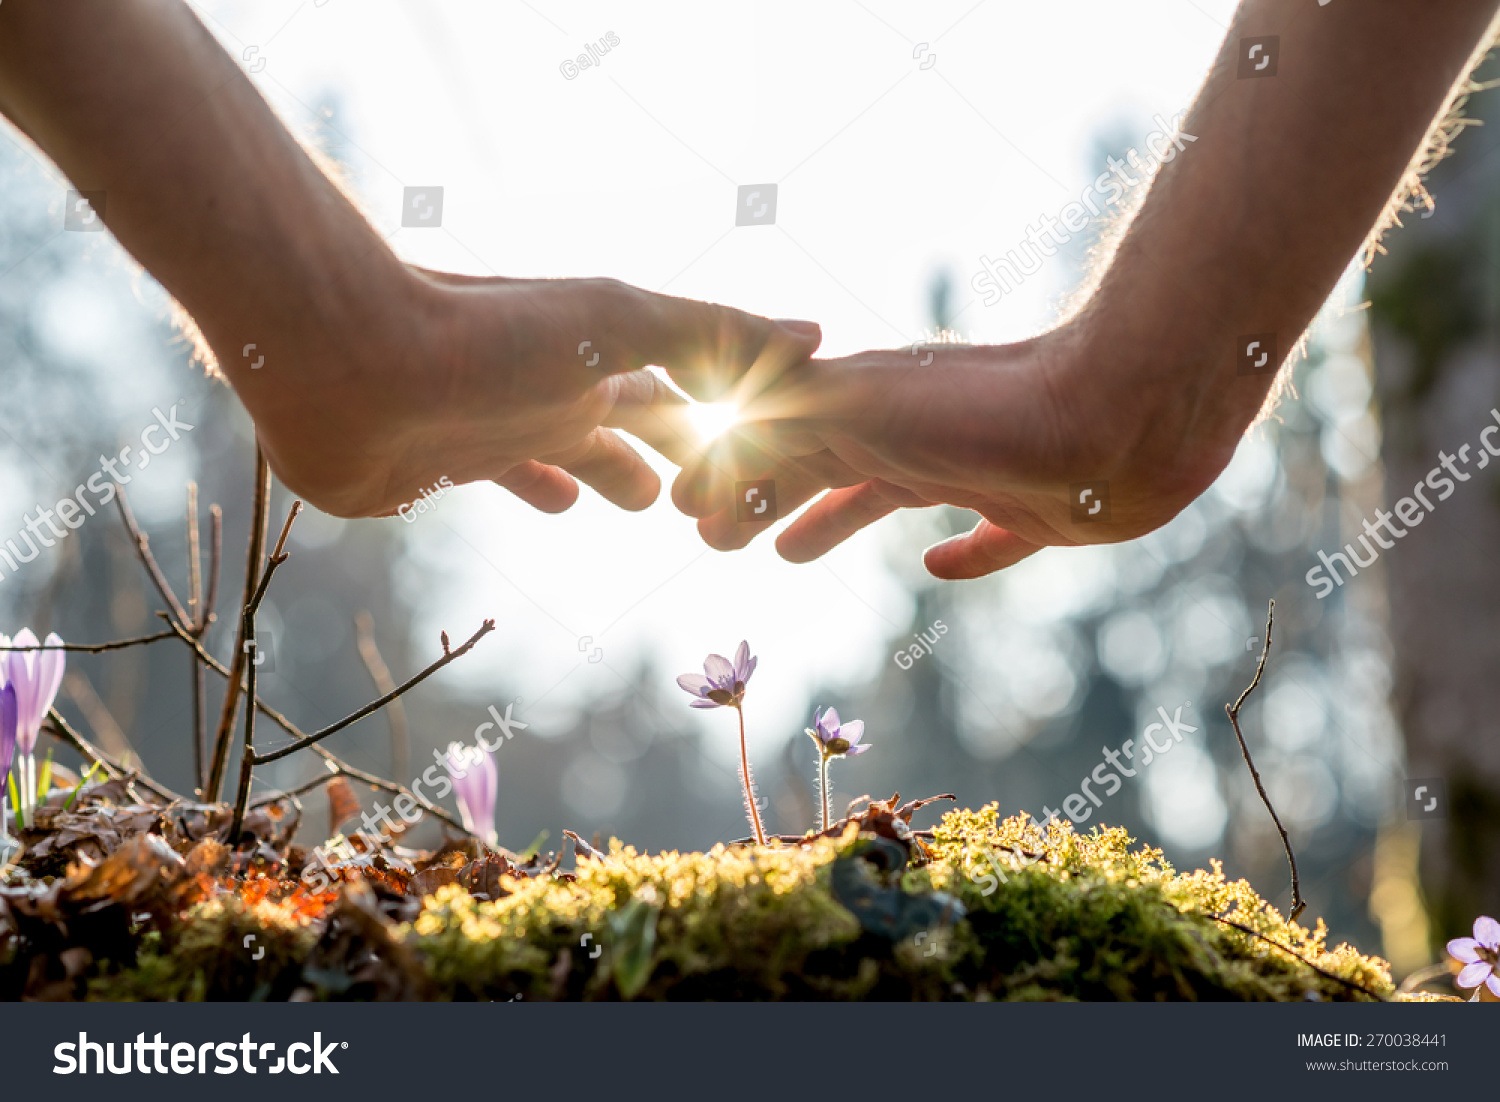 Close up Bare Hand of a Man Covering Small Flowers at the Garden with Sunlight Between Fingers. #270038441